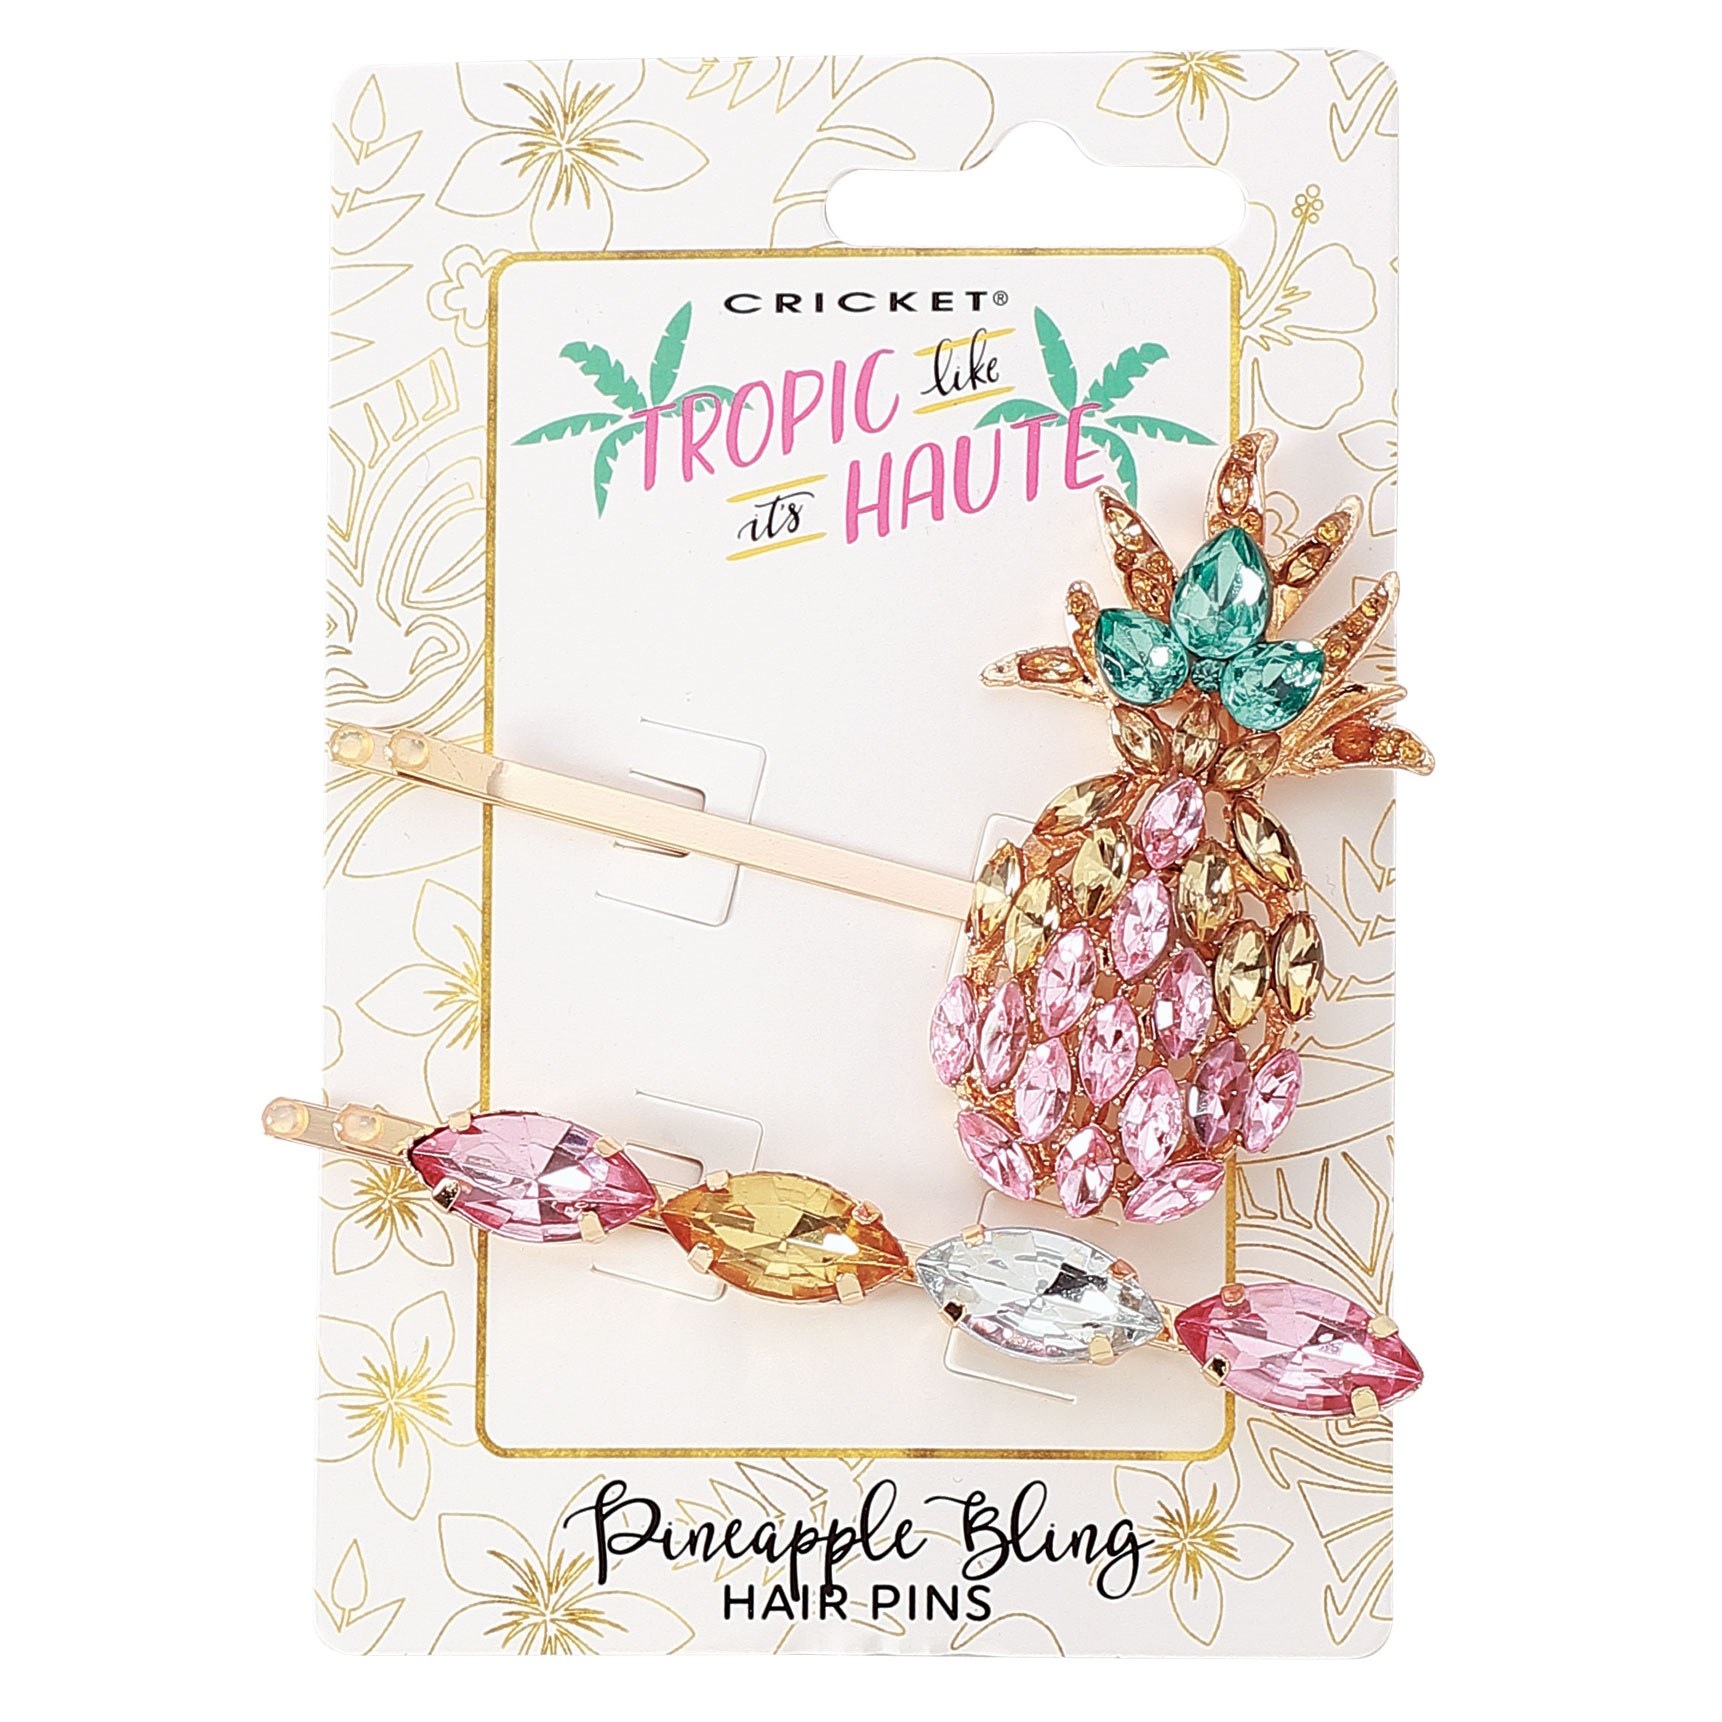 Cricket Tropic Like It's Haute: Pineapple Bling Hair Pins in Pink